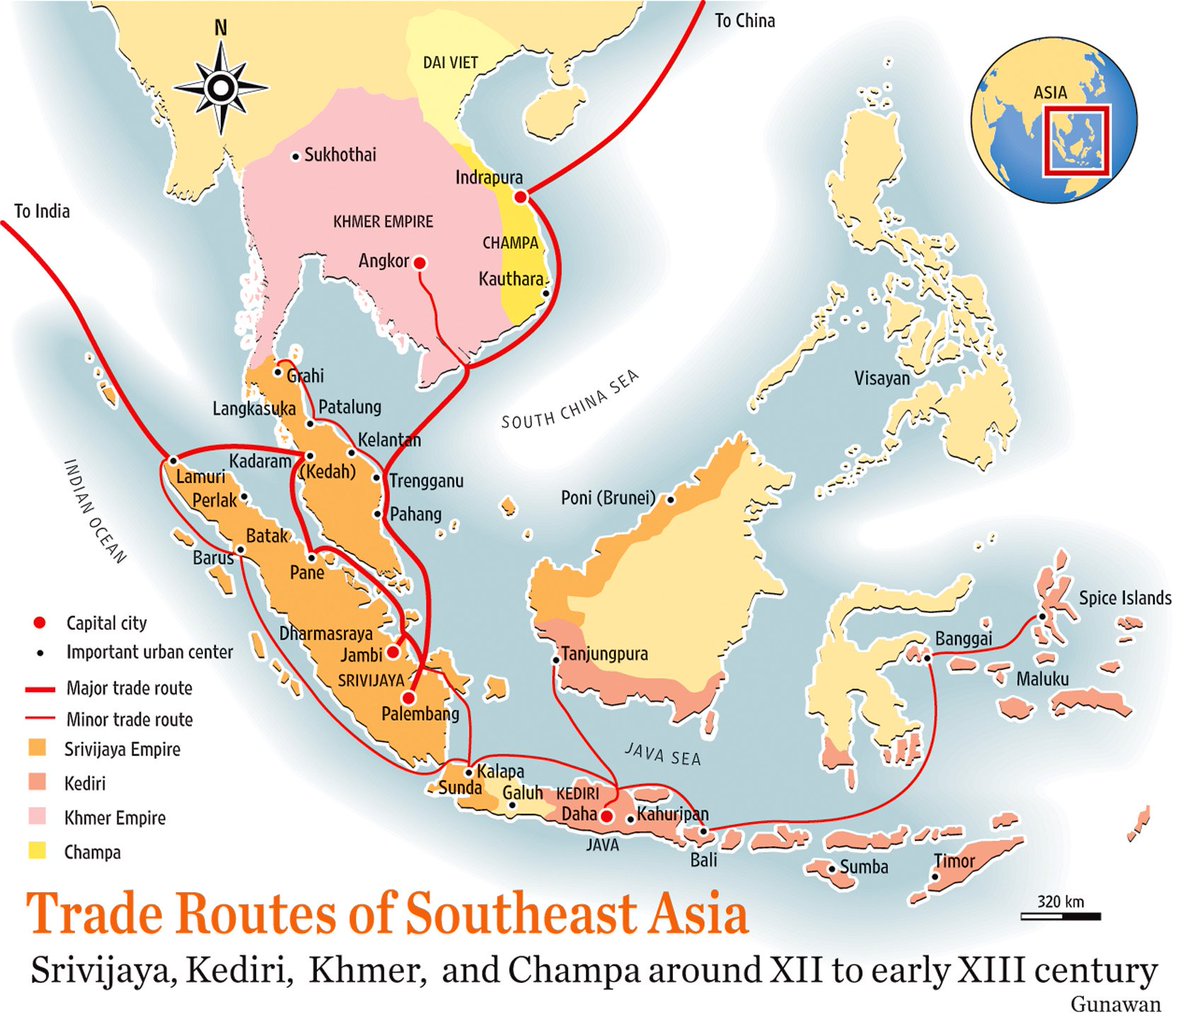 But at the same time, formerly close relations with other parts of Southeast Asia (particularly the mainland) were forgotten. The Malay states became stagnant *because* of the colonists, who blamed it on the "native physique" and "indolence"